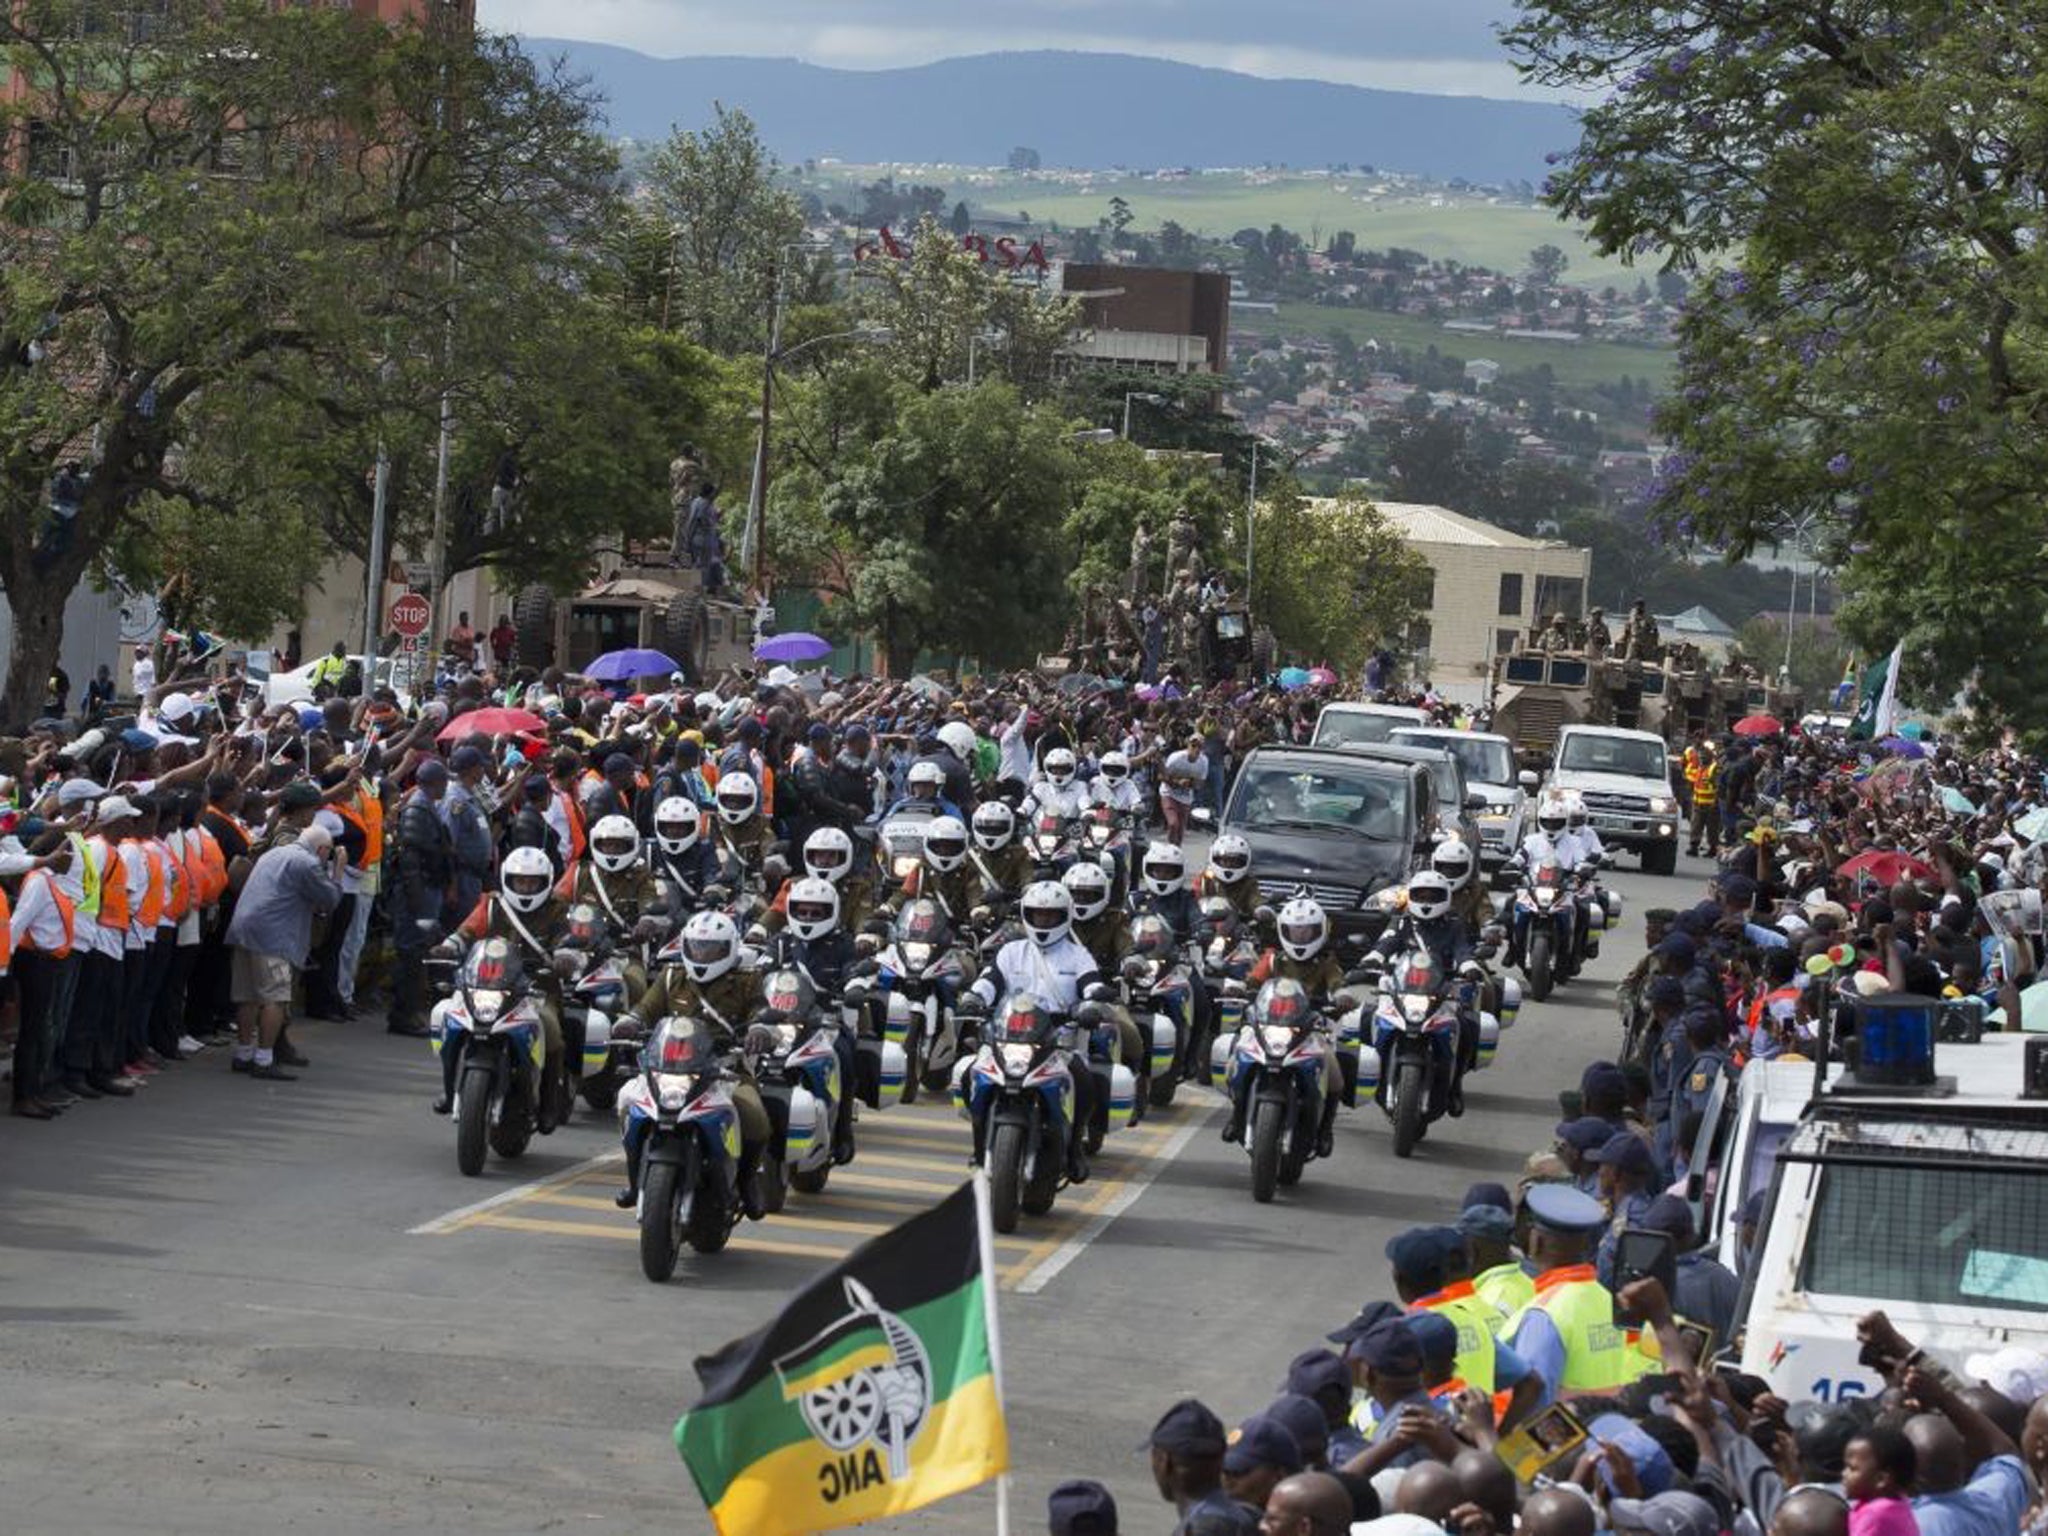 The motorcade transporting the body of Nelson Mandela, in black hearse, passes through crowds of mourners gathered in the town of Mthatha on its way to Qunu